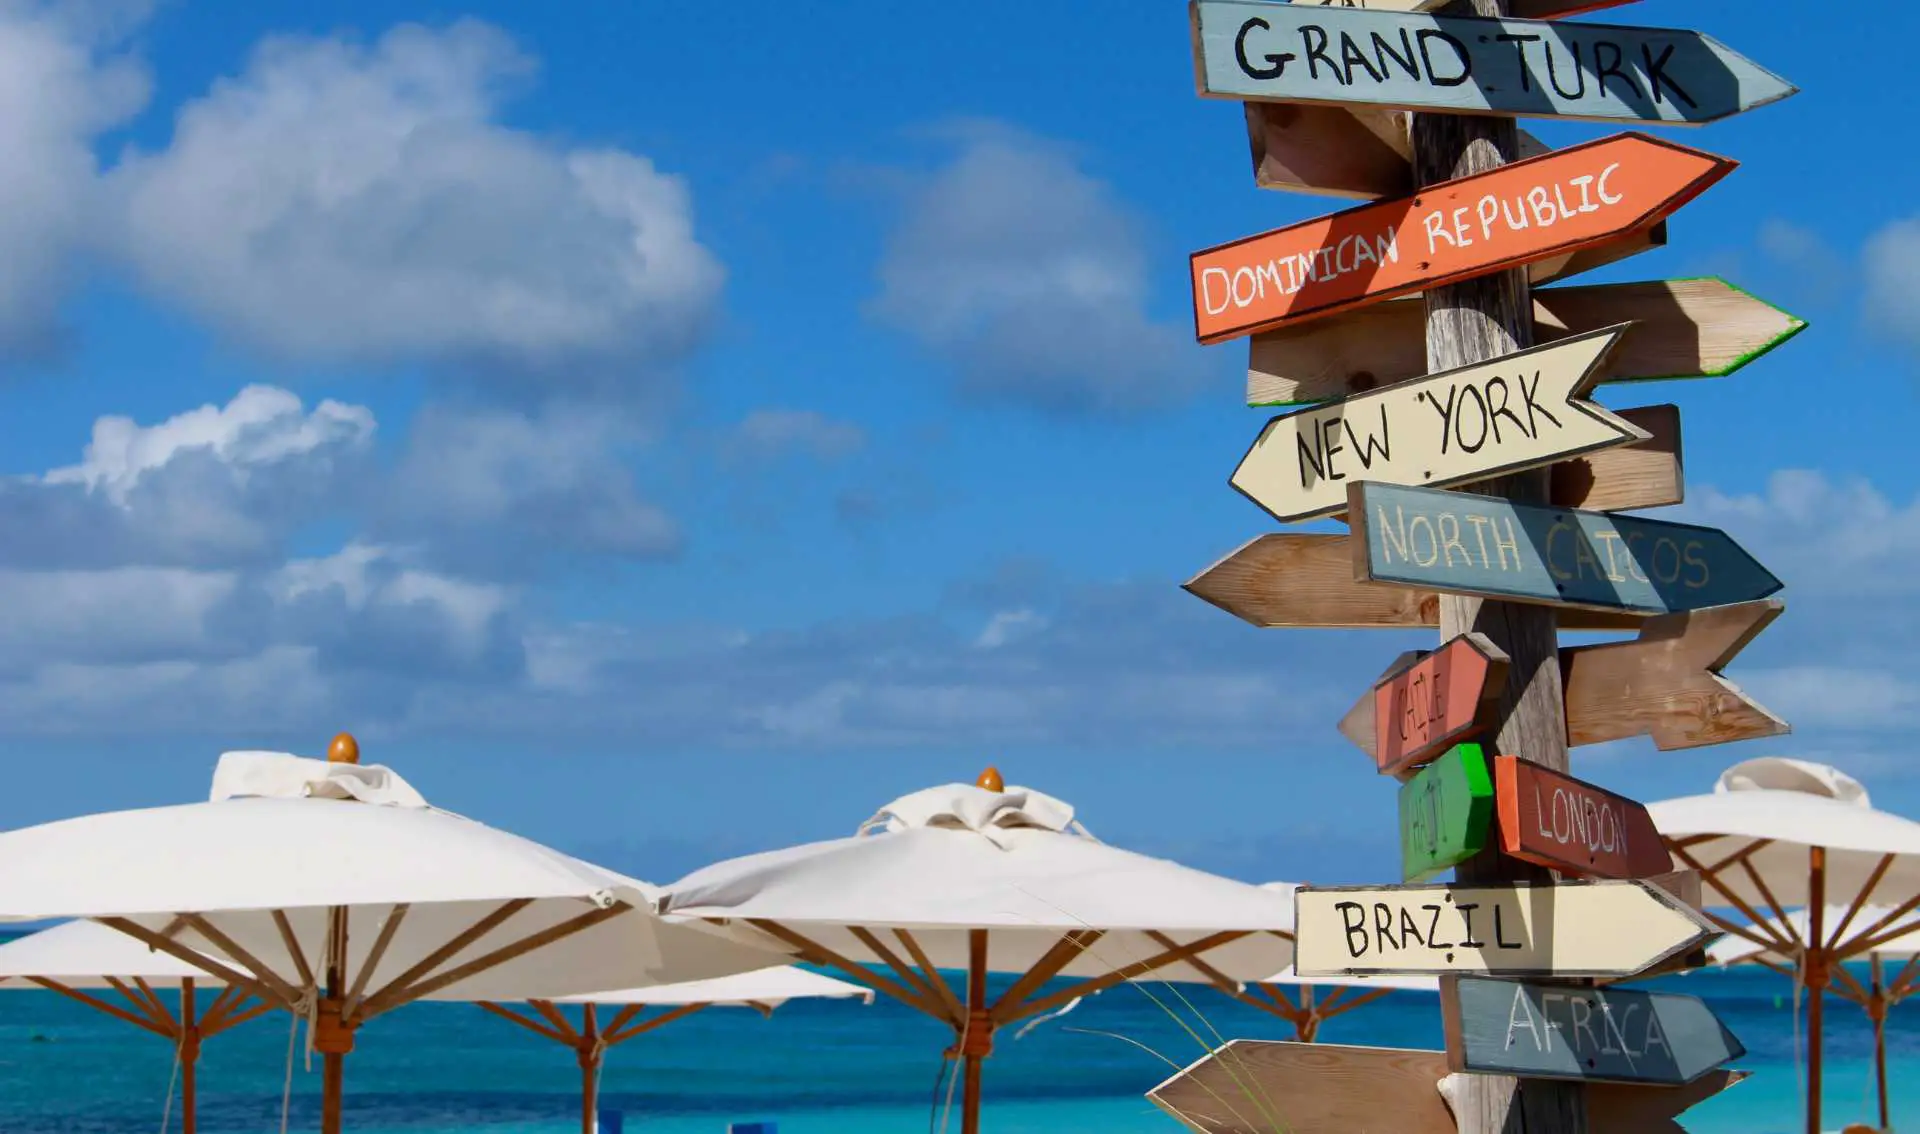 sign on turks and caicos pointing to different cities